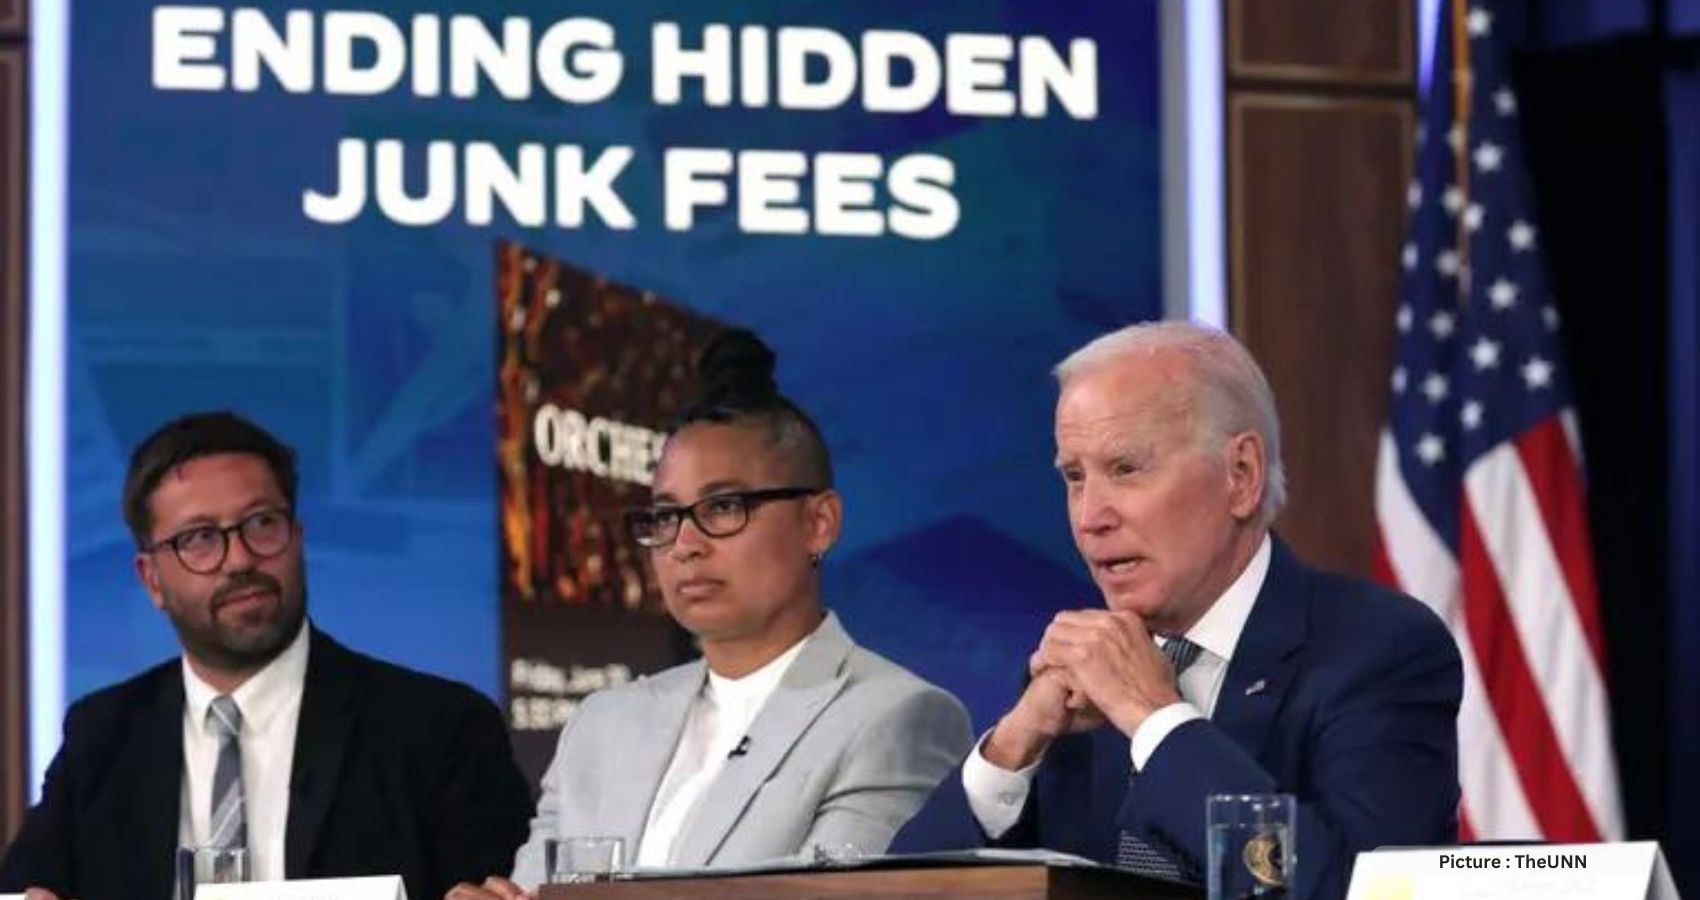 New Efforts to Curb “Junk Fees” Unveiled by Biden Administration